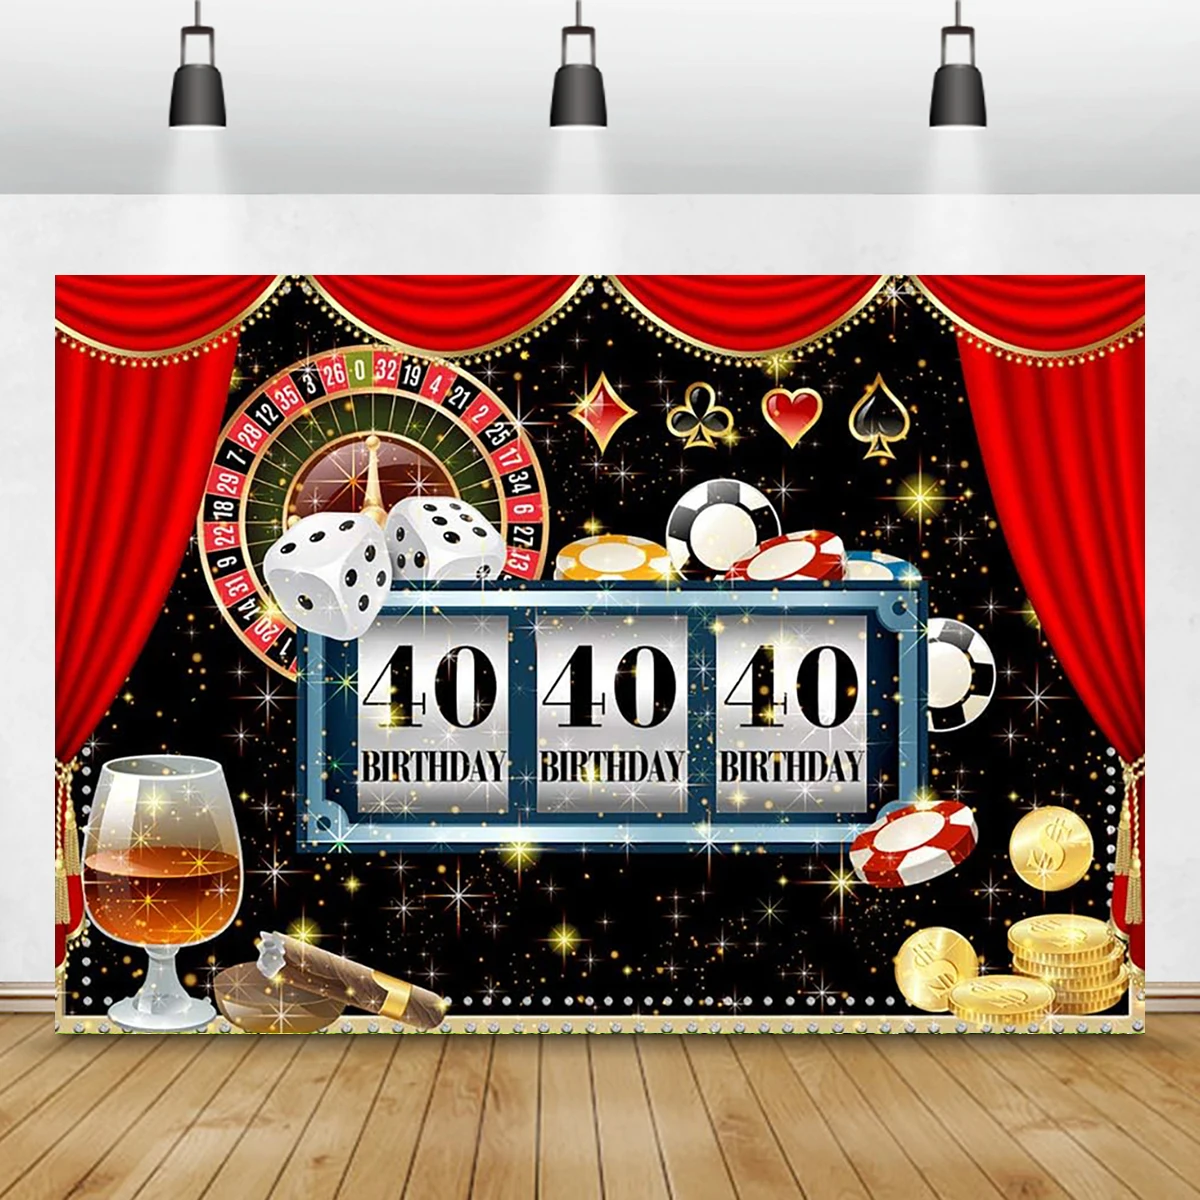 Enlarge Las Vegas Casino Backdrop for Party Photography Poker Chip Turntable Photography YouTube Background Photo Video Props Decoration